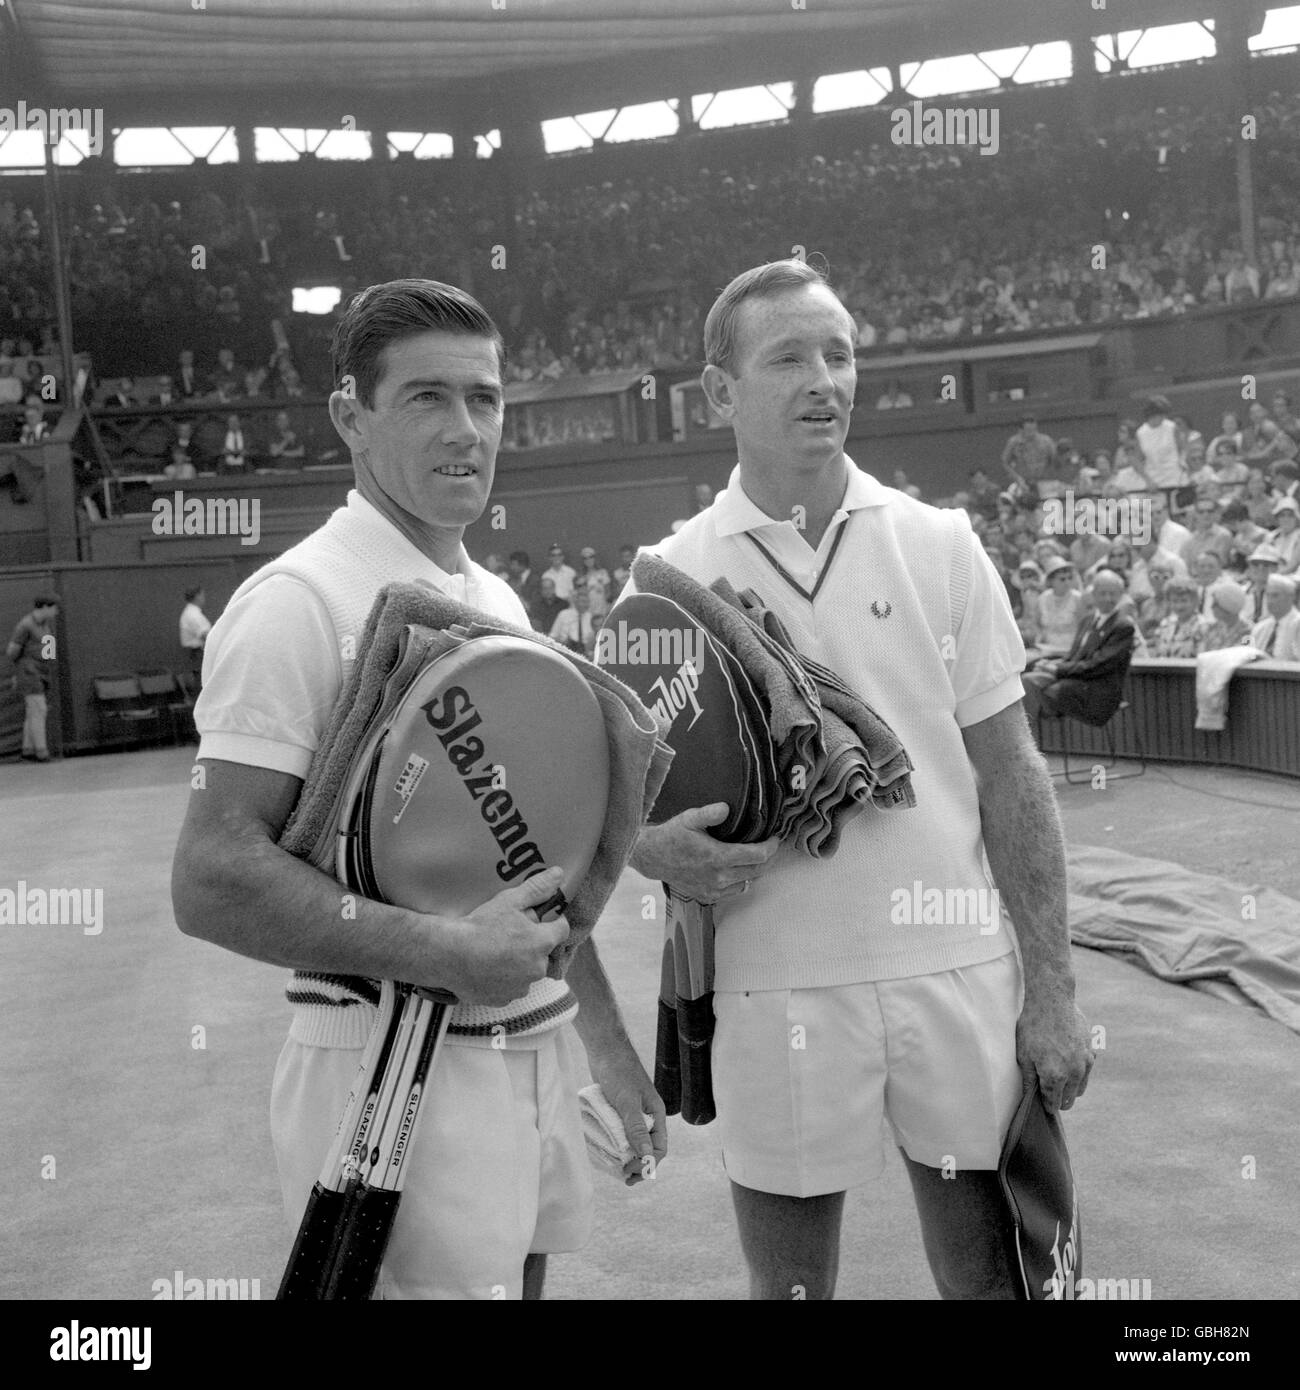 australians-ken-rosewall-left-and-rod-laver-before-the-final-of-the-GBH82N.jpg